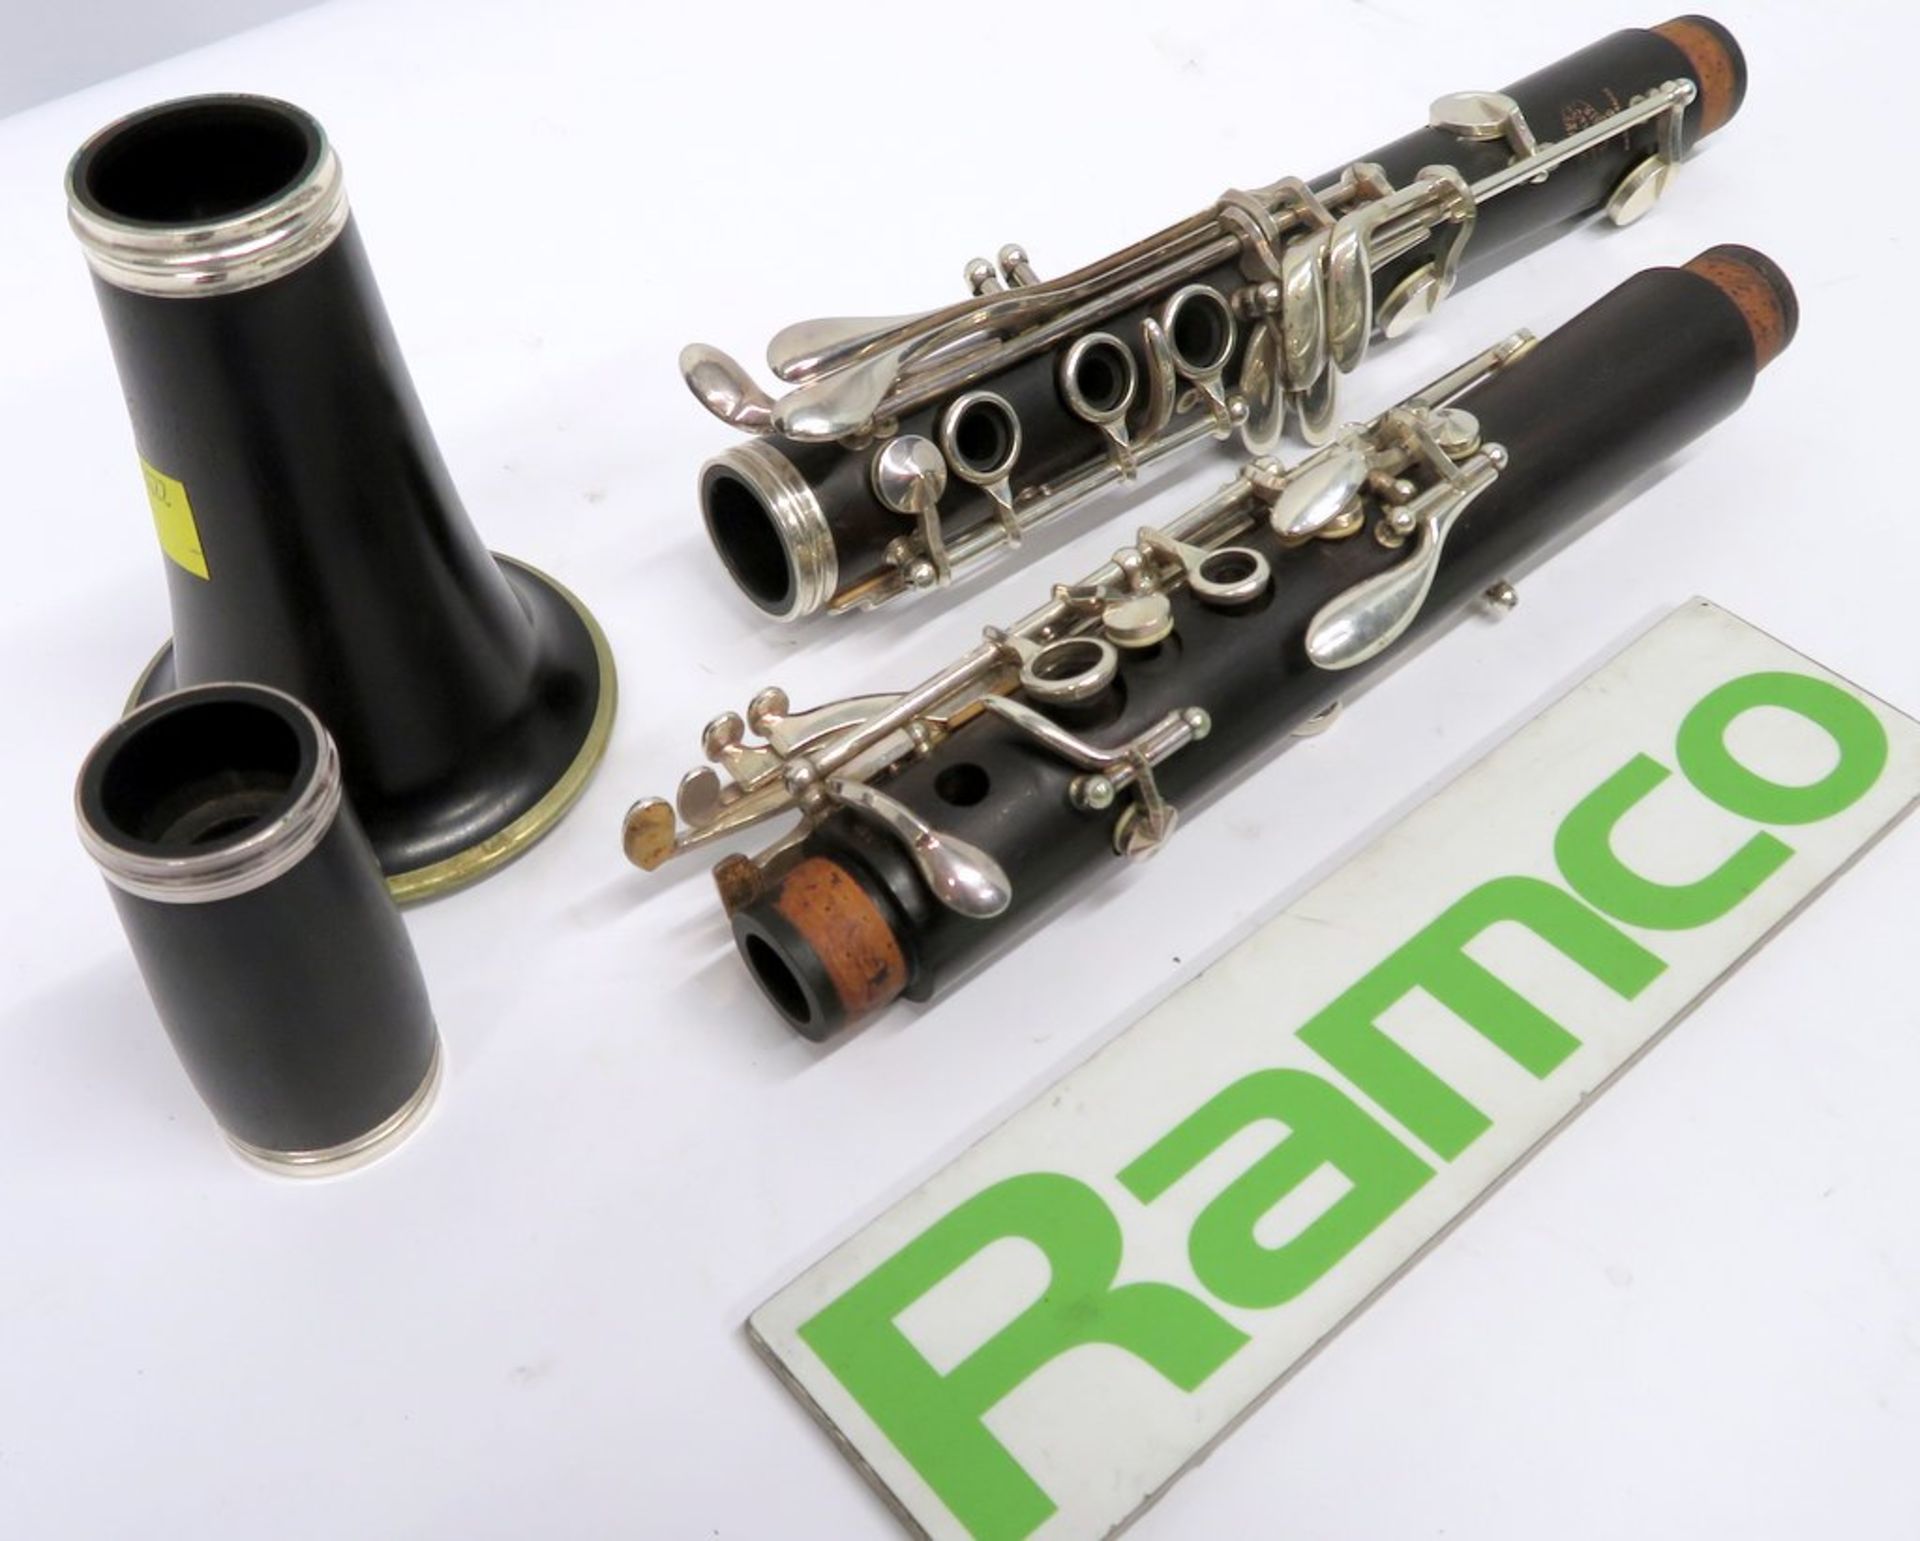 Buffet Crampon Clarinet Complete With Case. - Image 4 of 13